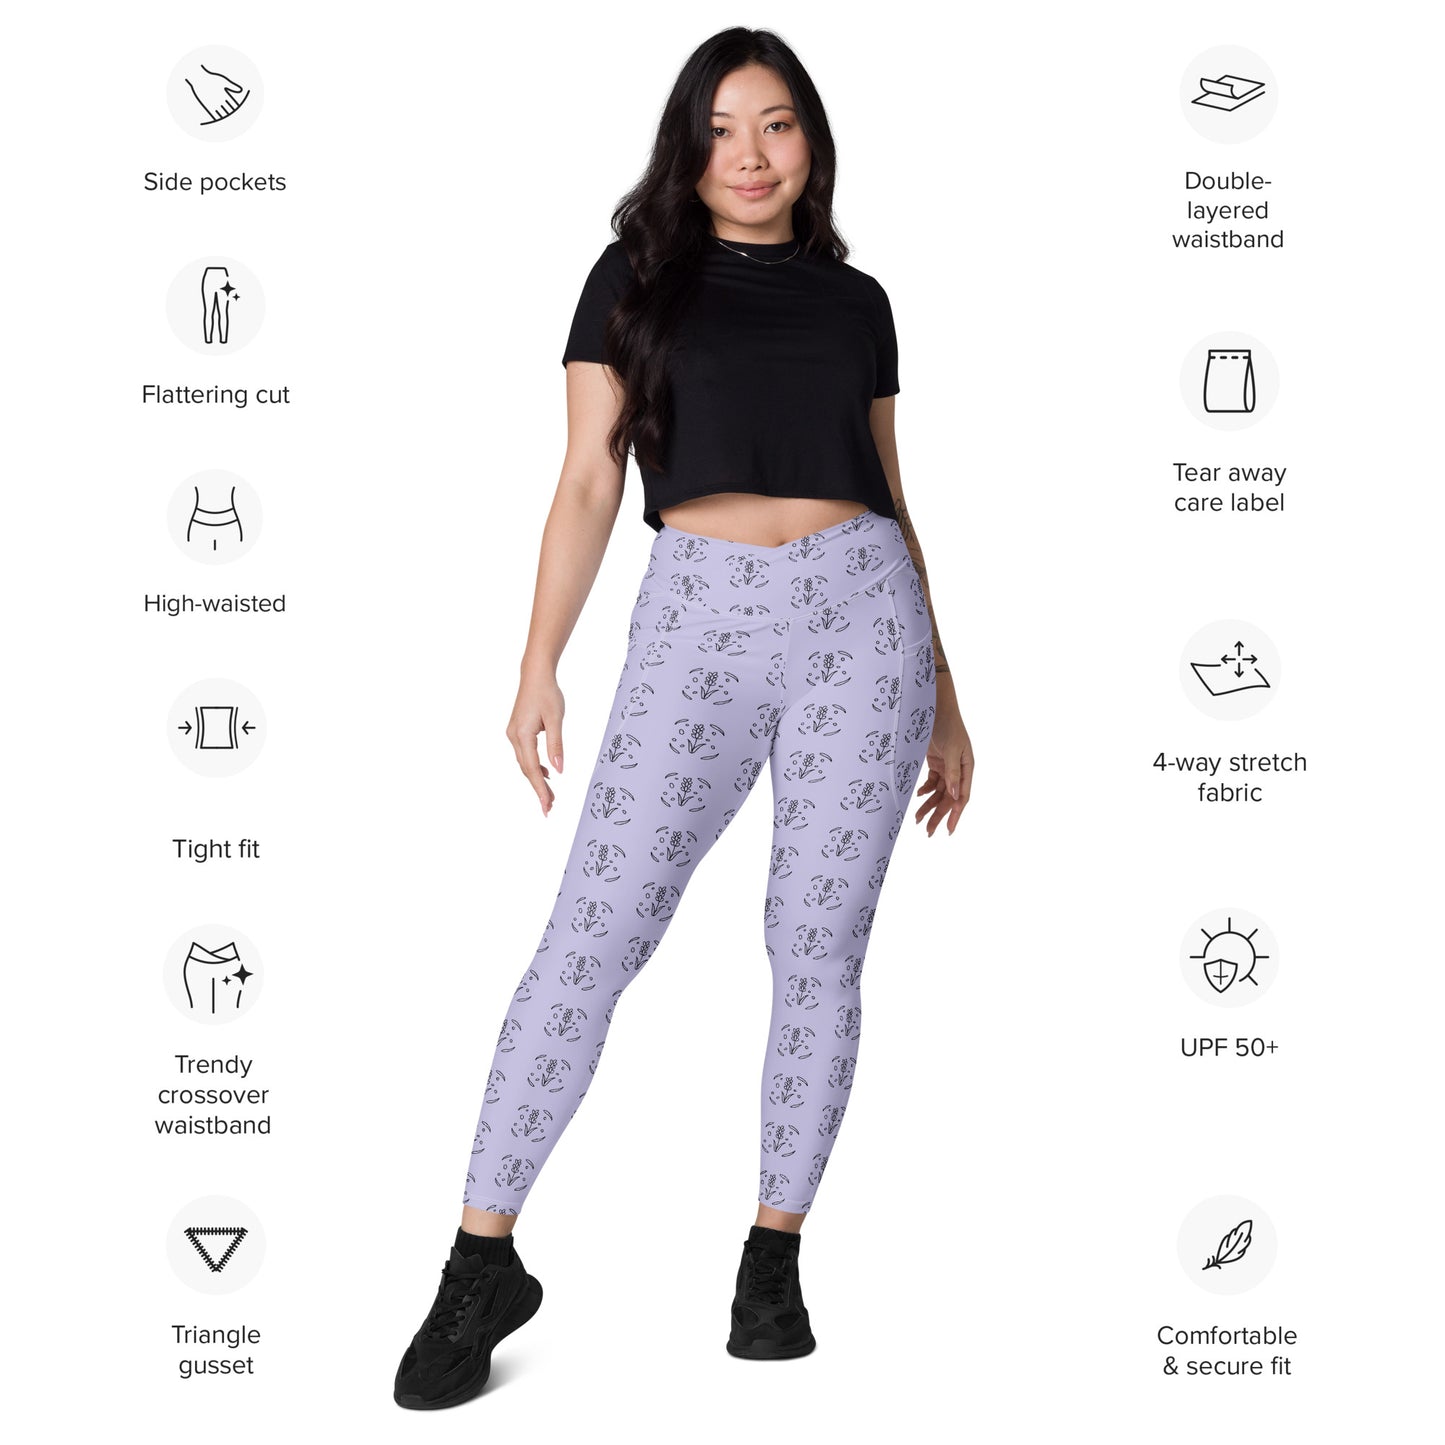 Lavender Crossover leggings with pockets